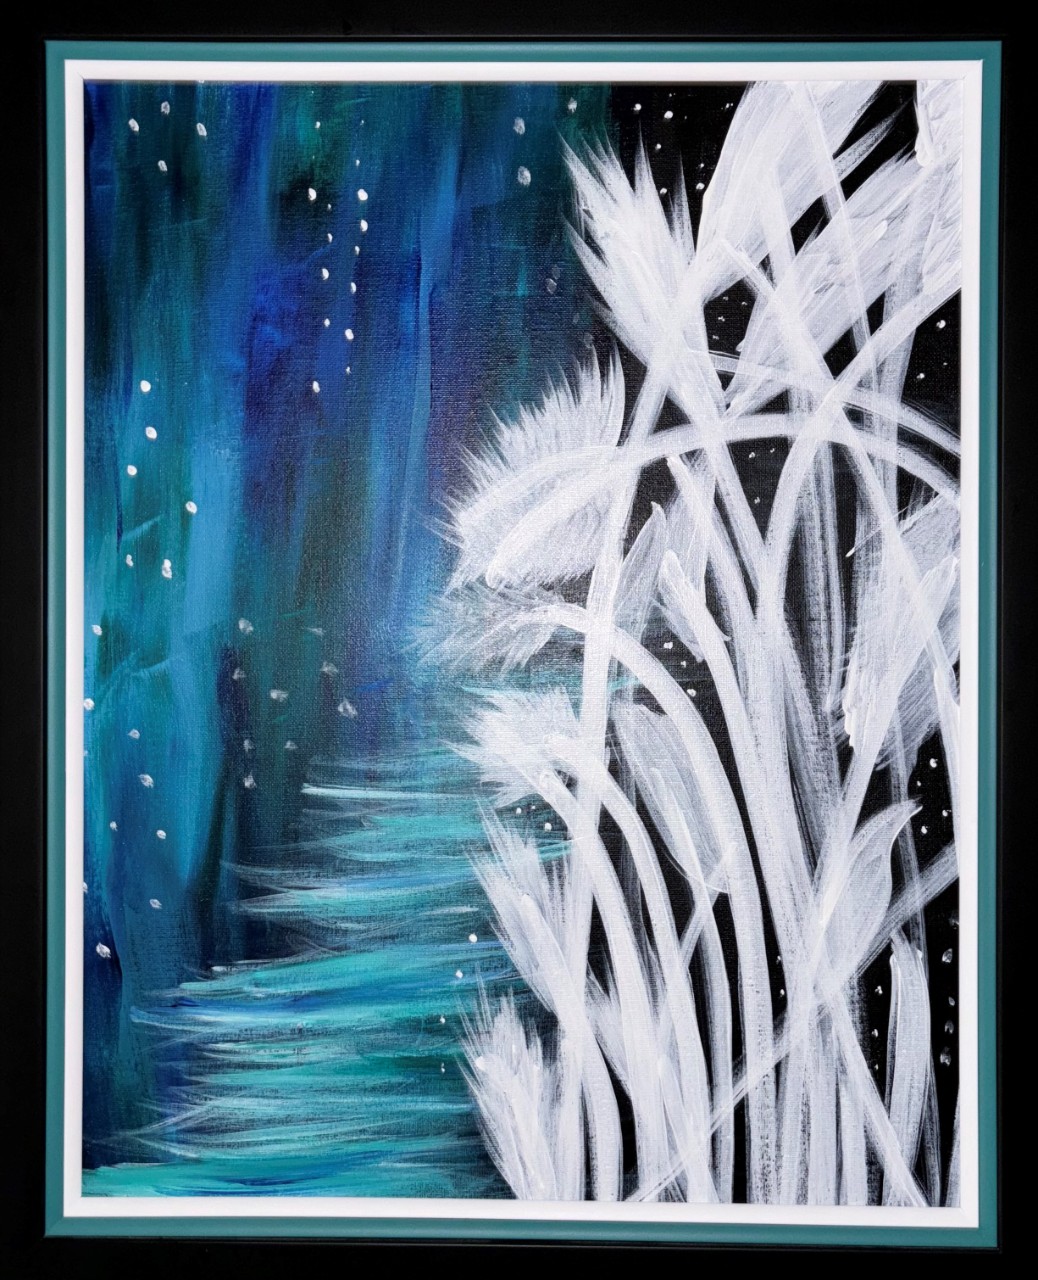 A vertical, rectangular painting features strong white, blue, and black colors. The background of the painting is black with white specks, evoking stars. The right half of the image features tall, white stalks with feathery tops, evoking gracefully bending plants. The left of the picture features vertical blue streaks. In the center, lighter, horizontal blue streaks disappear toward a horizon line. 